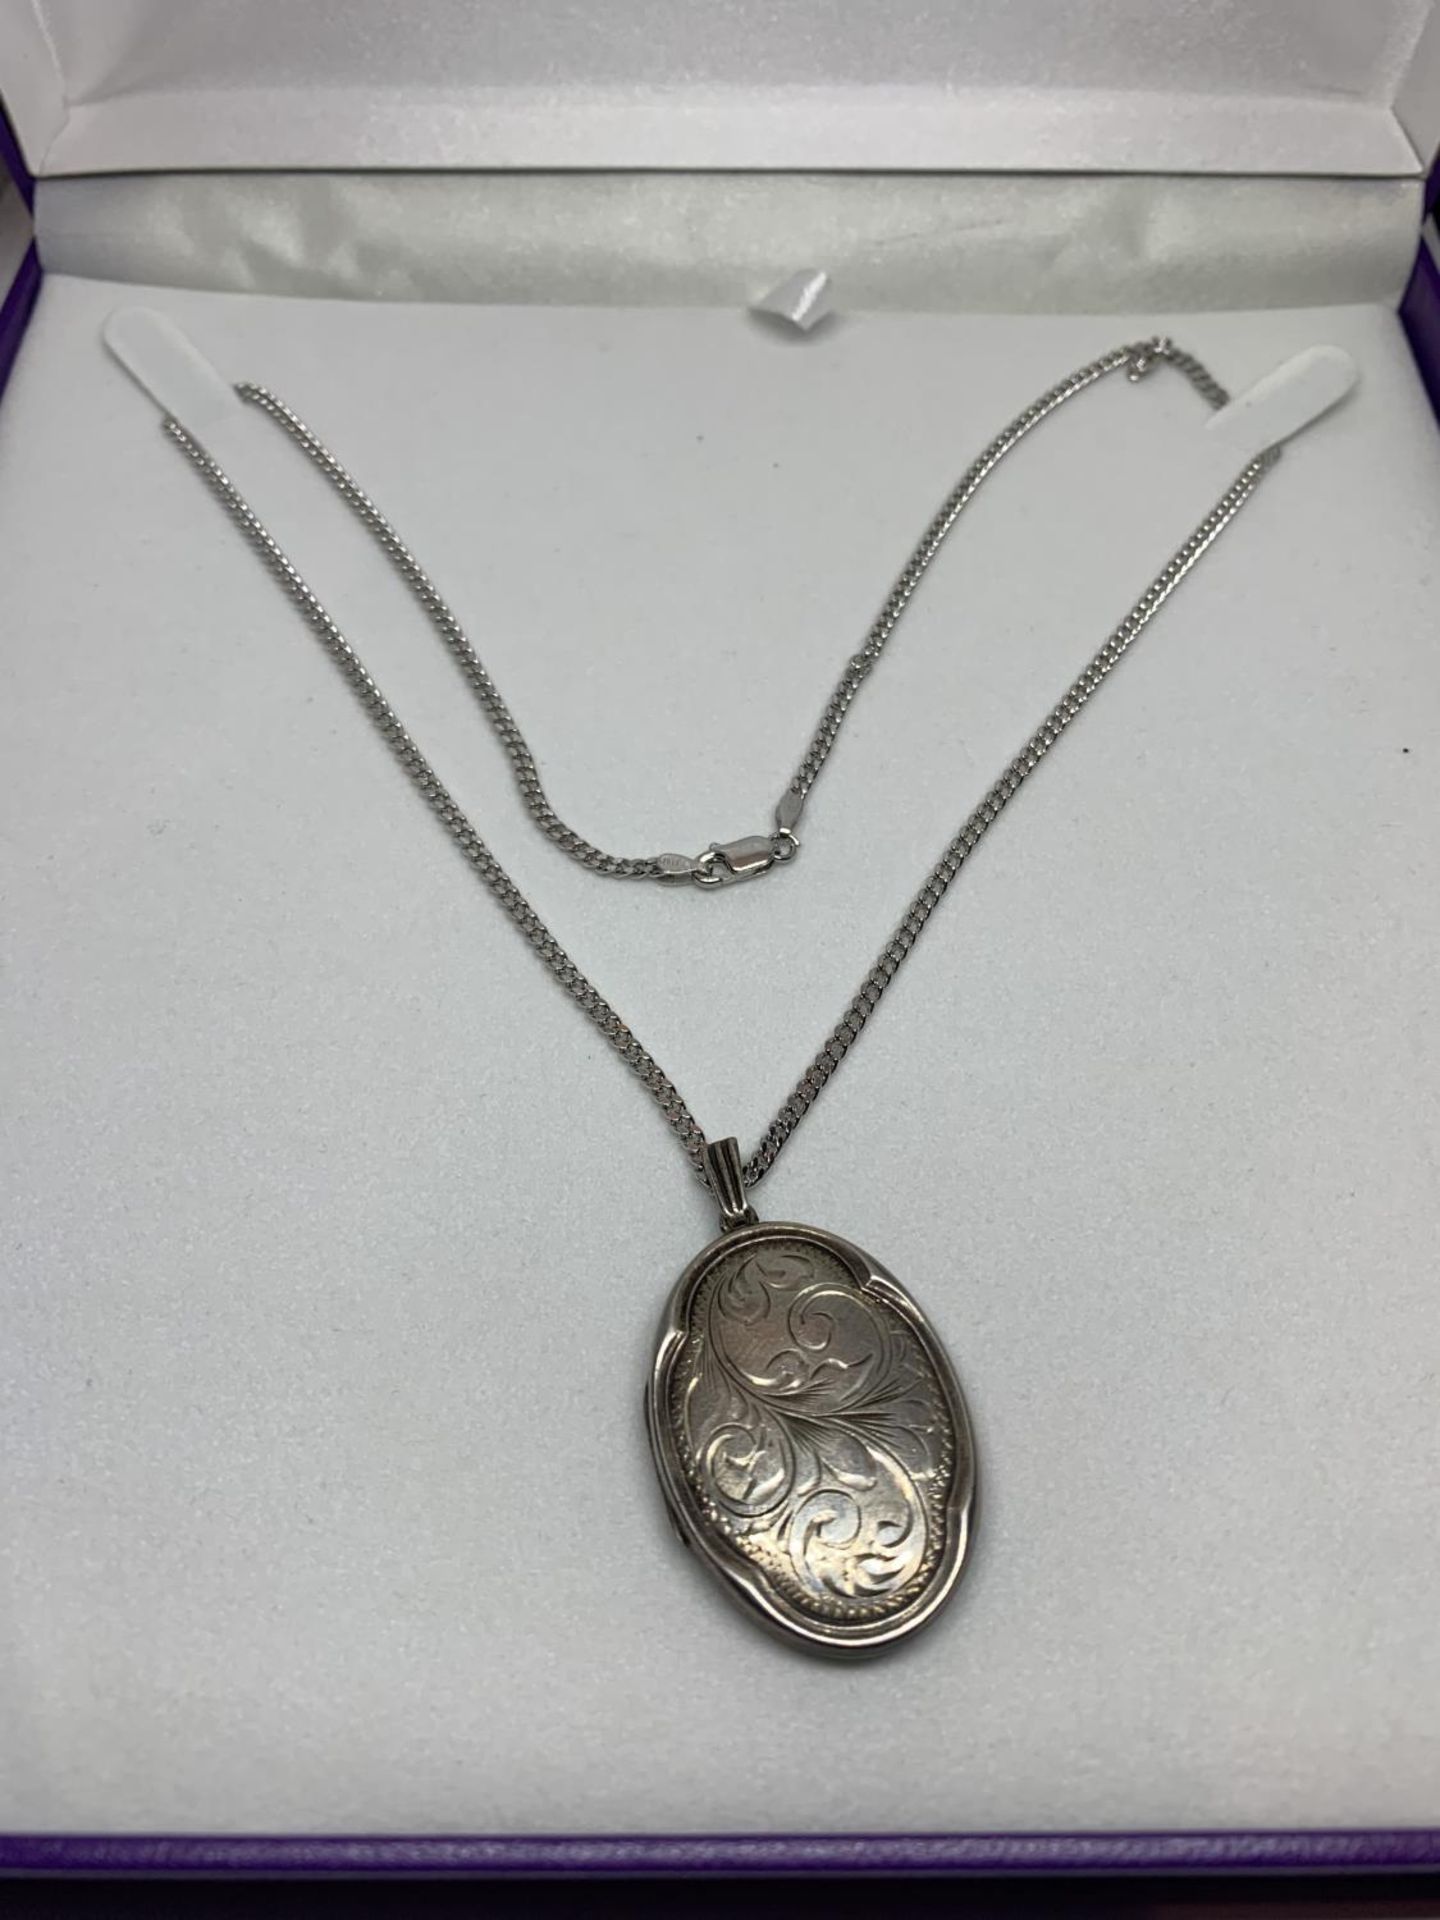 A SILVER NECKLACE WITH A SILVER LOCKET IN A PRESENTATION BOX